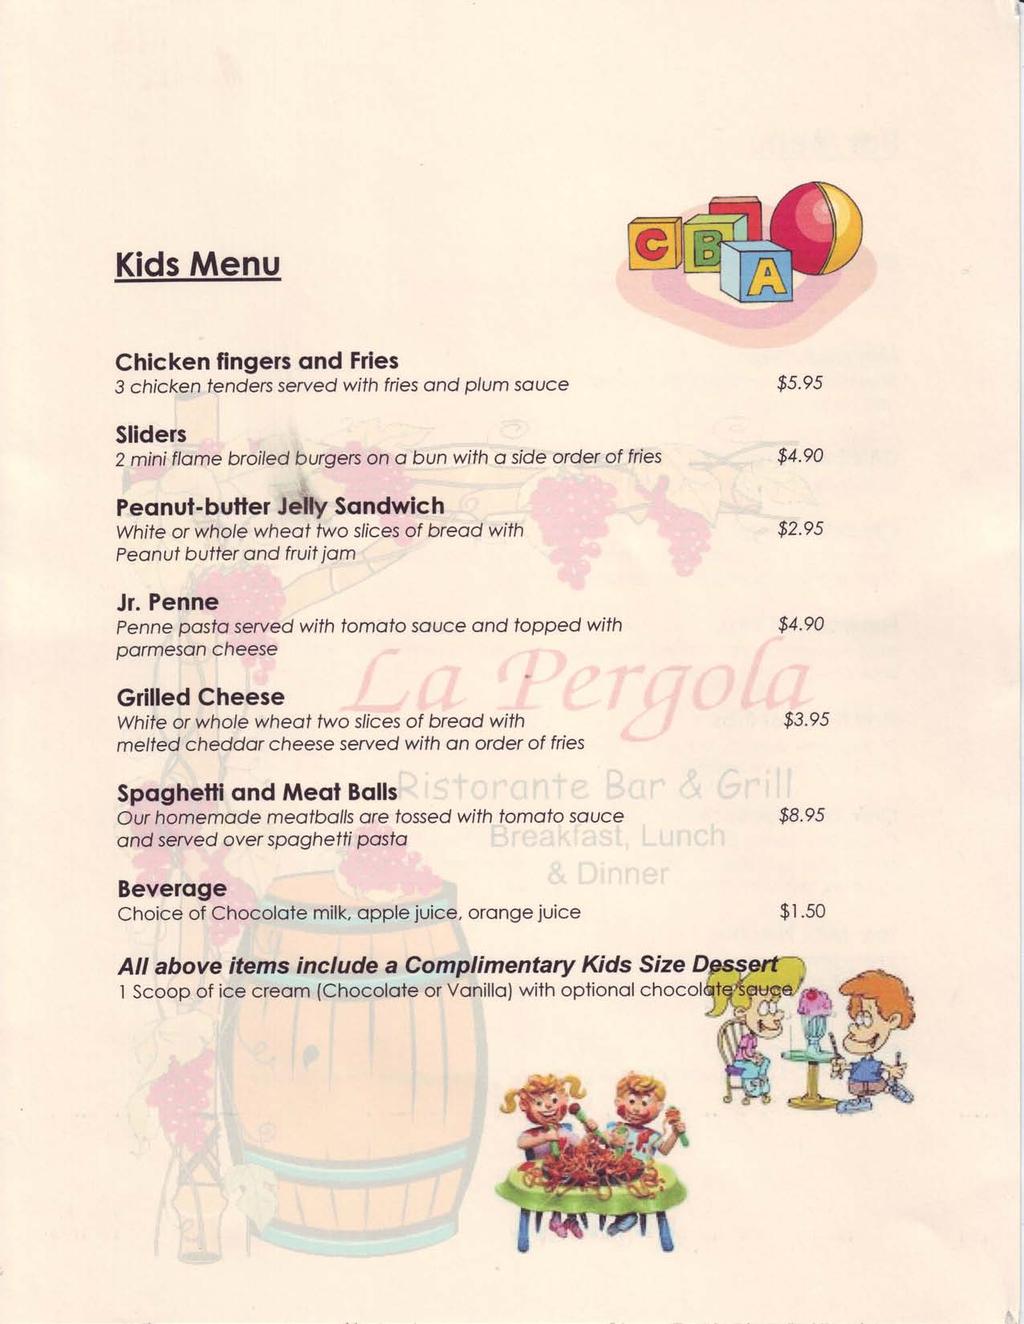 Kids Menu Chicken fingers ond Fries 3 chicken fenders serve d with fries ond plum souce Sliders 2 mini flome broiled burgers on o bun with o side order of fries Peqnut- butler Jelry Sqndwic h White